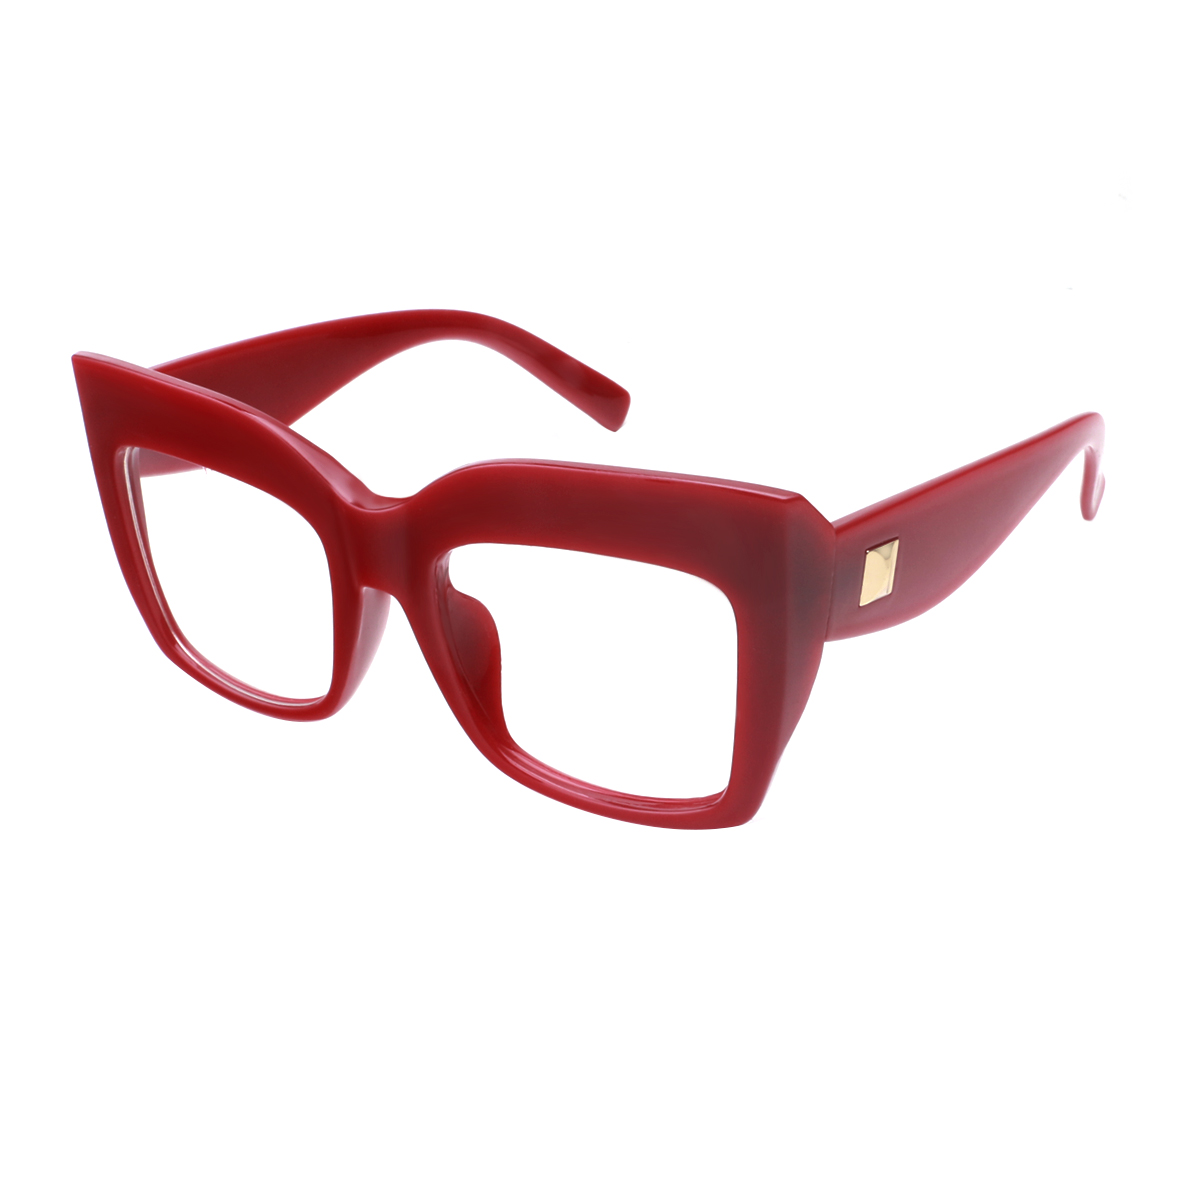 Cicely - Square Red Reading Glasses for Women